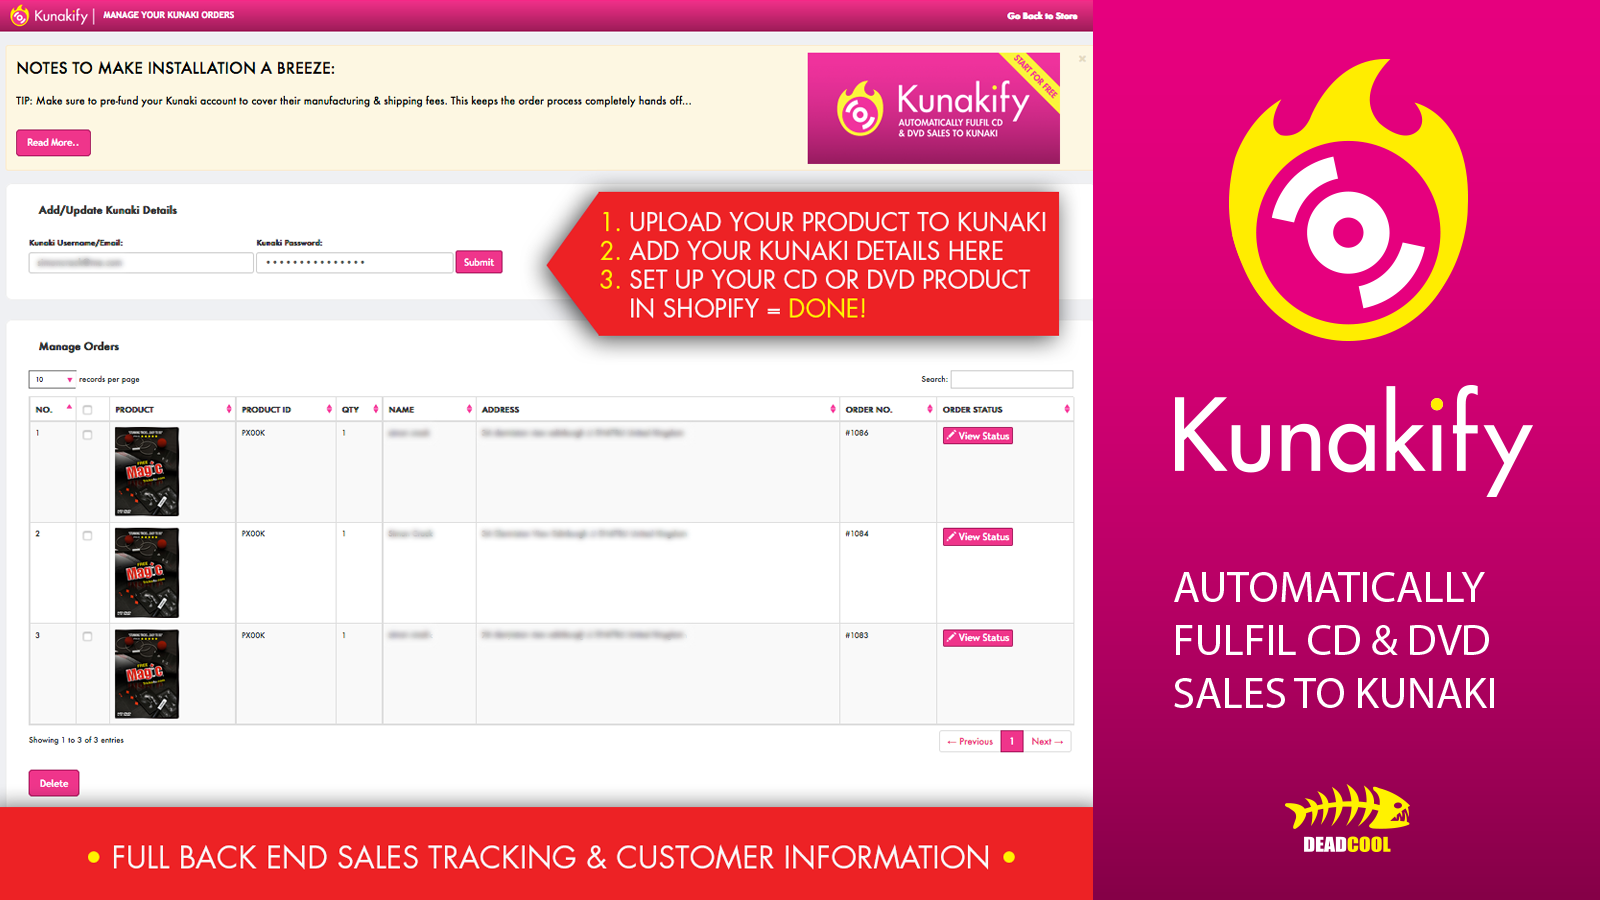 Full back end sales tracking and customer information